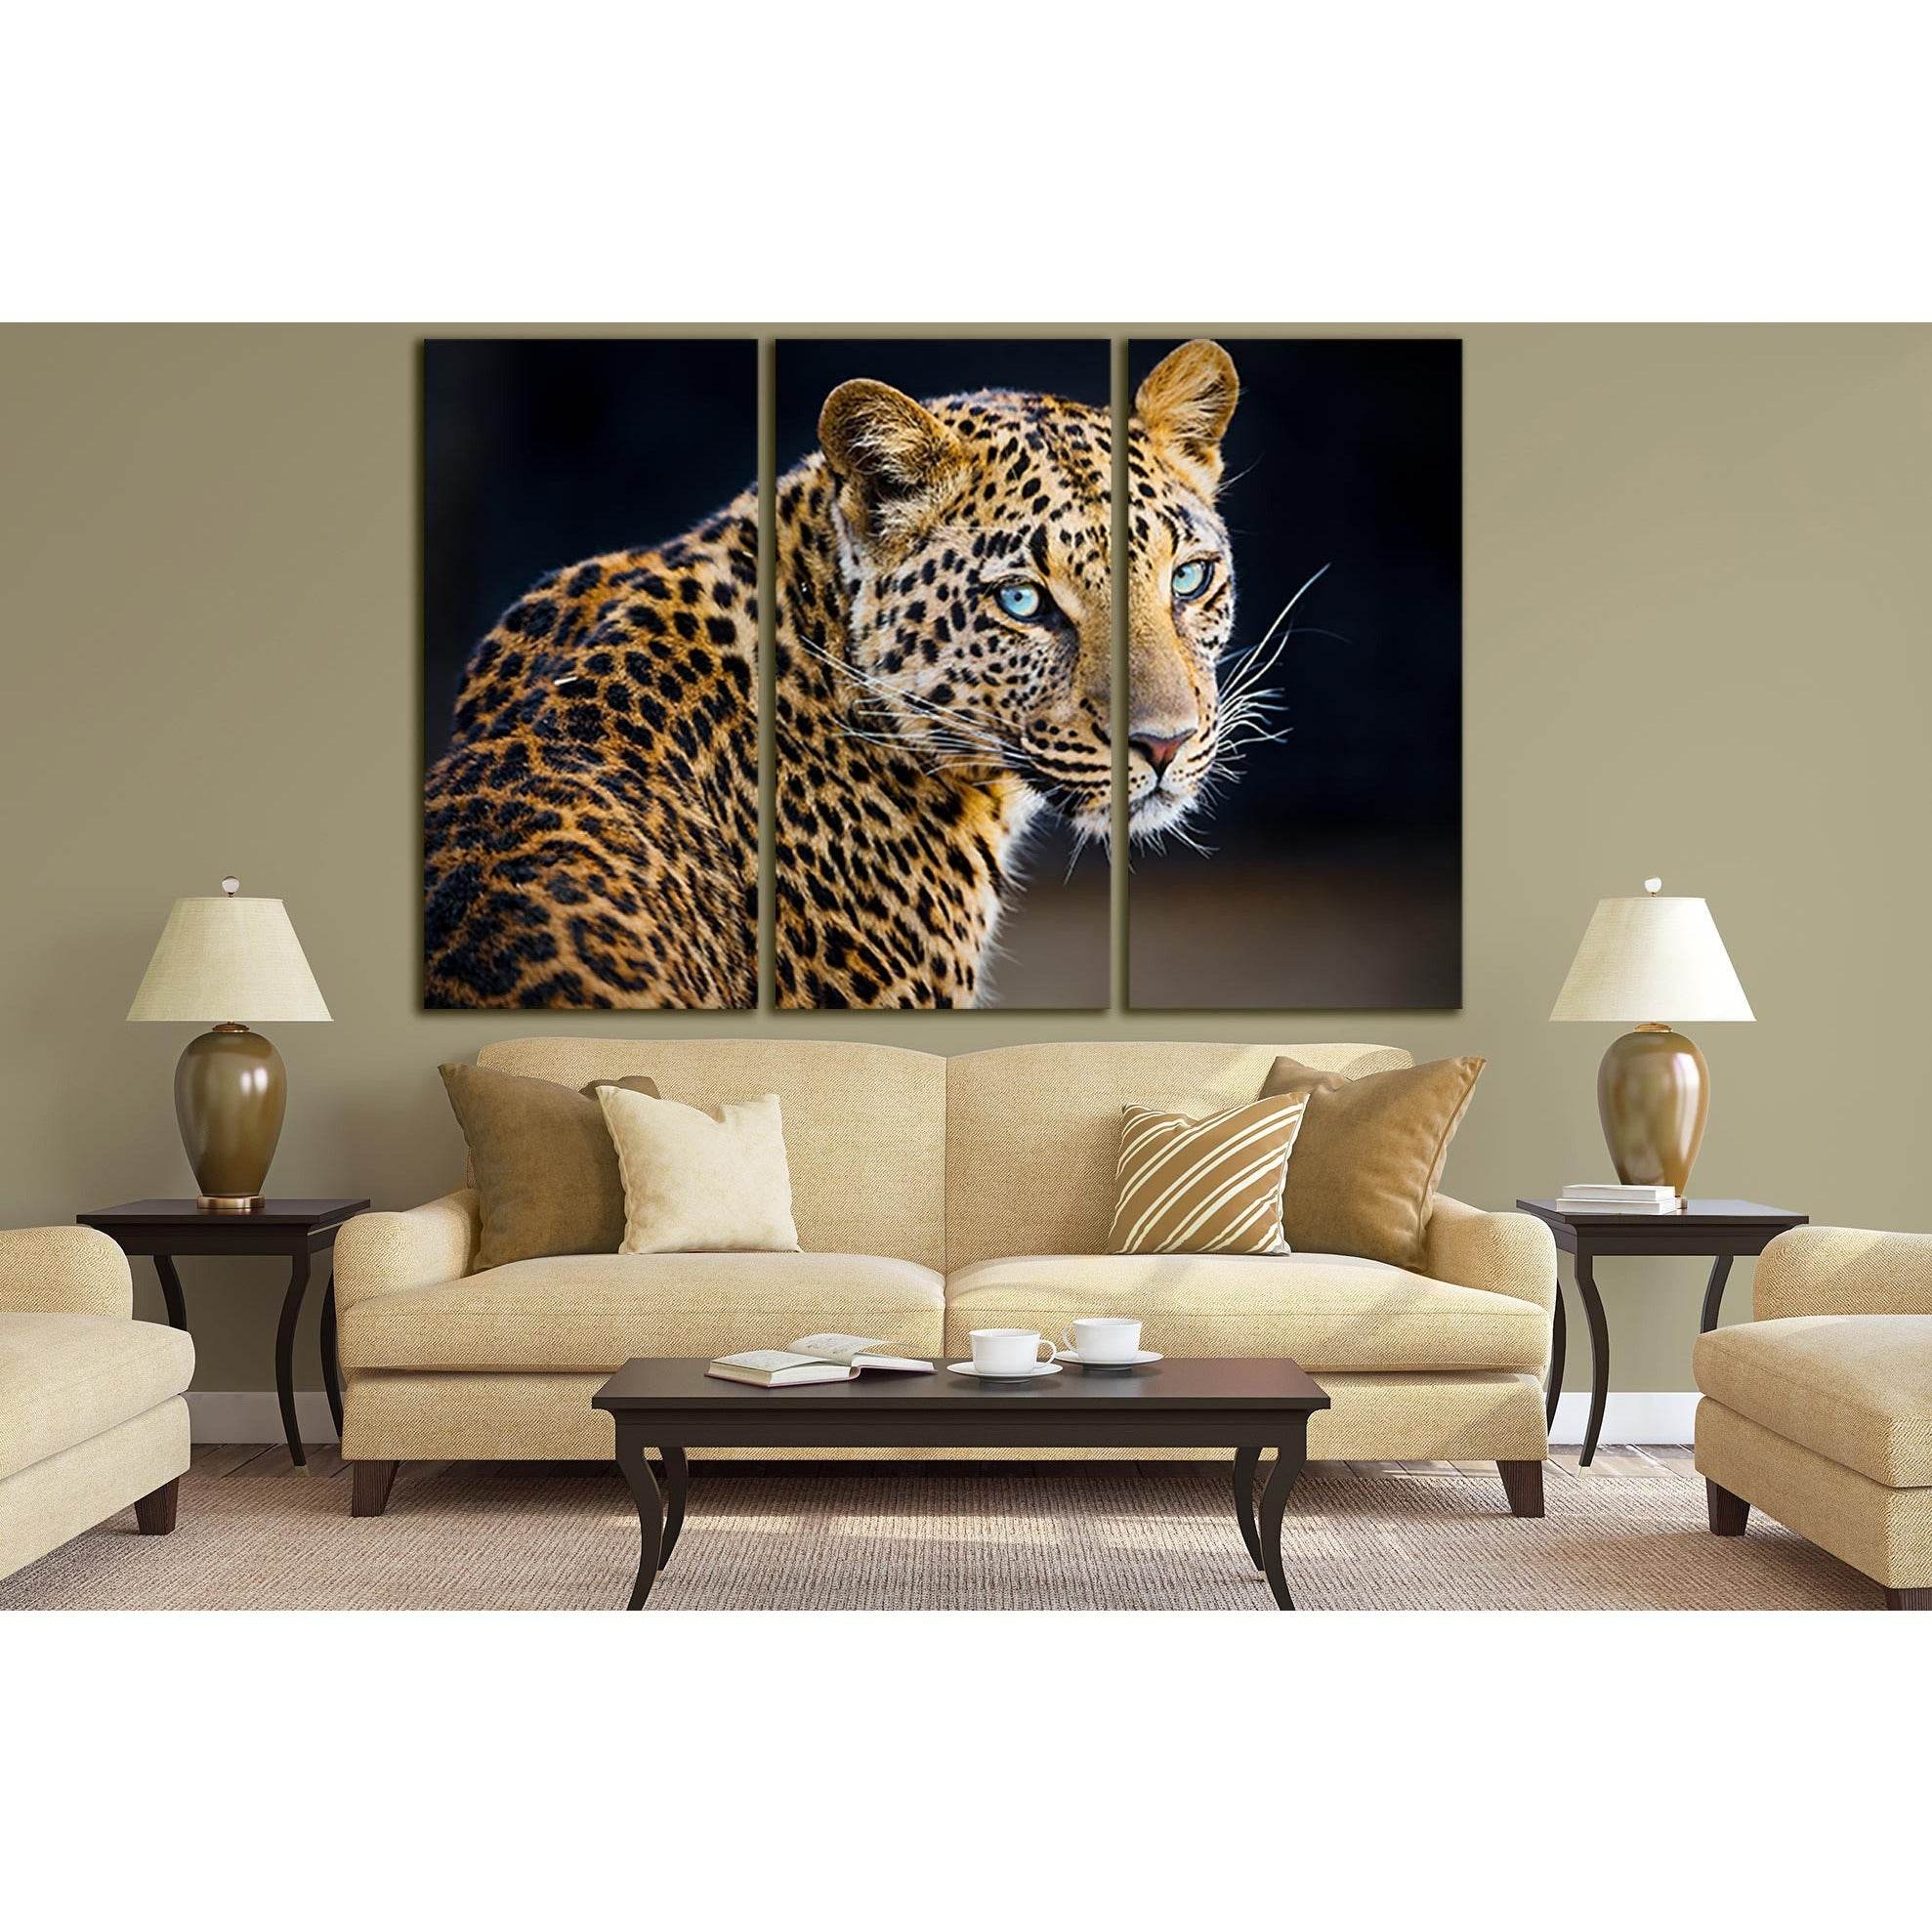 Leopard On A Black Background №SL1535 Ready to Hang Canvas Print